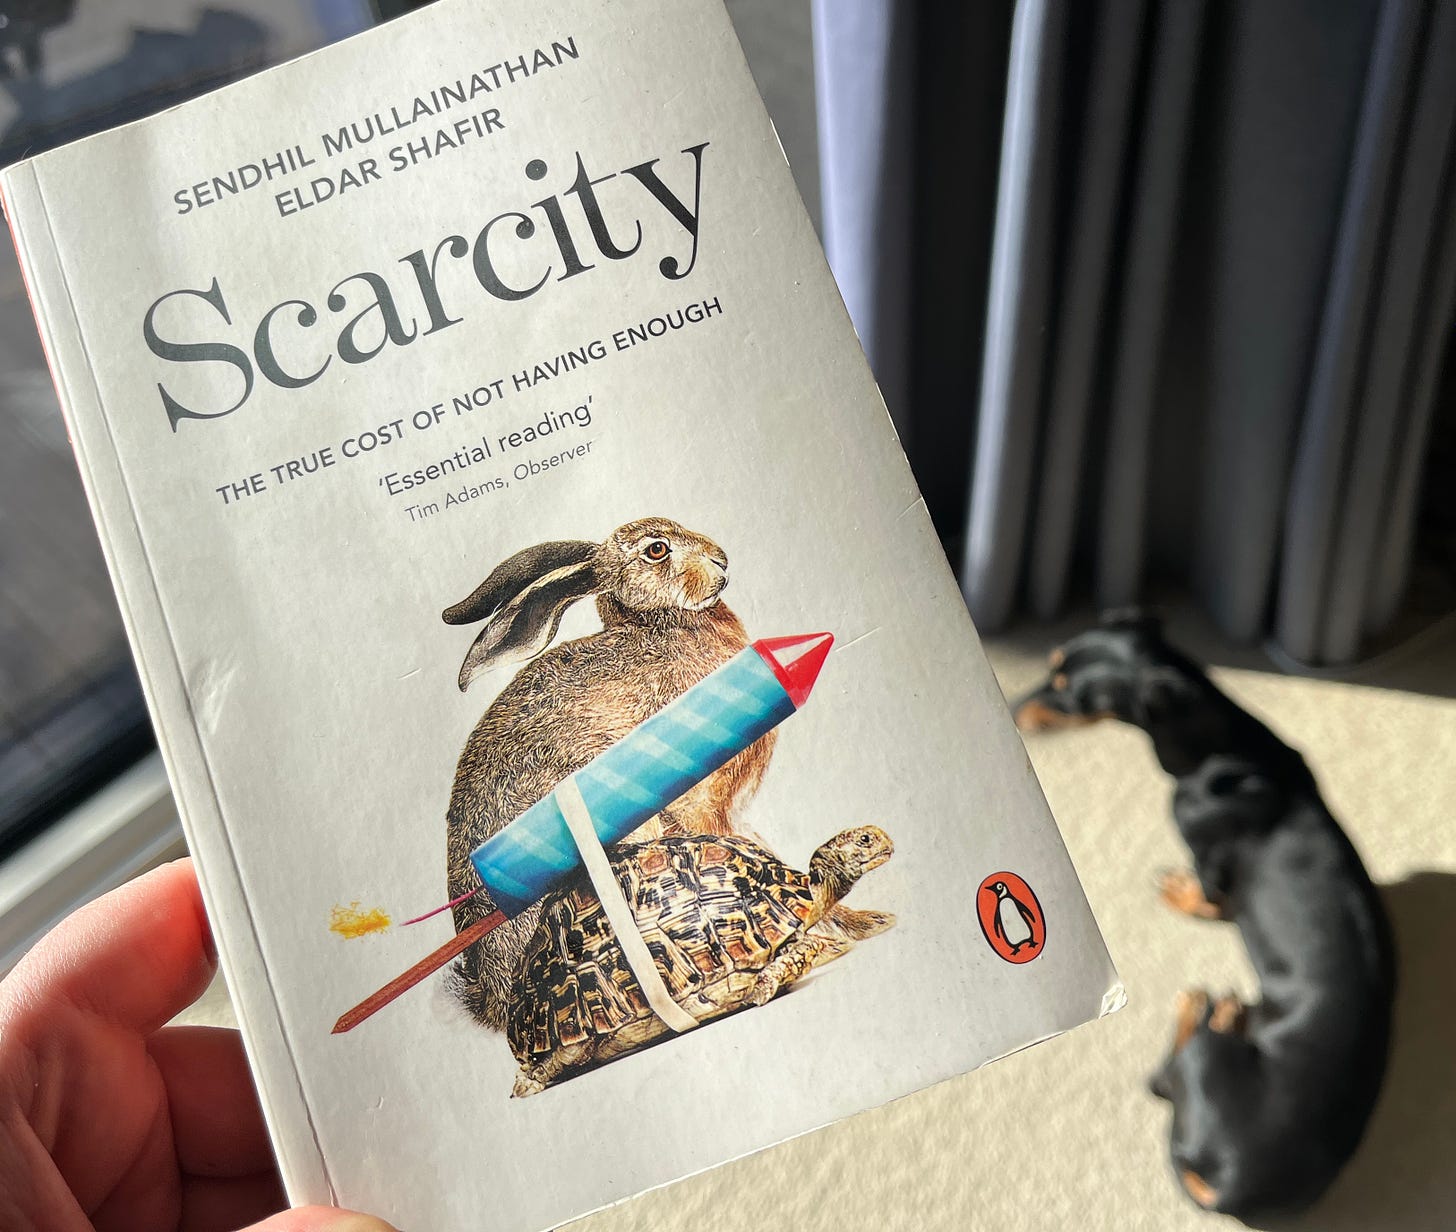 A hand holds the book Scarcity, by Sendhil Mullainathan and Eldar Shafir, and in the background a black dachshund sits on the floor.